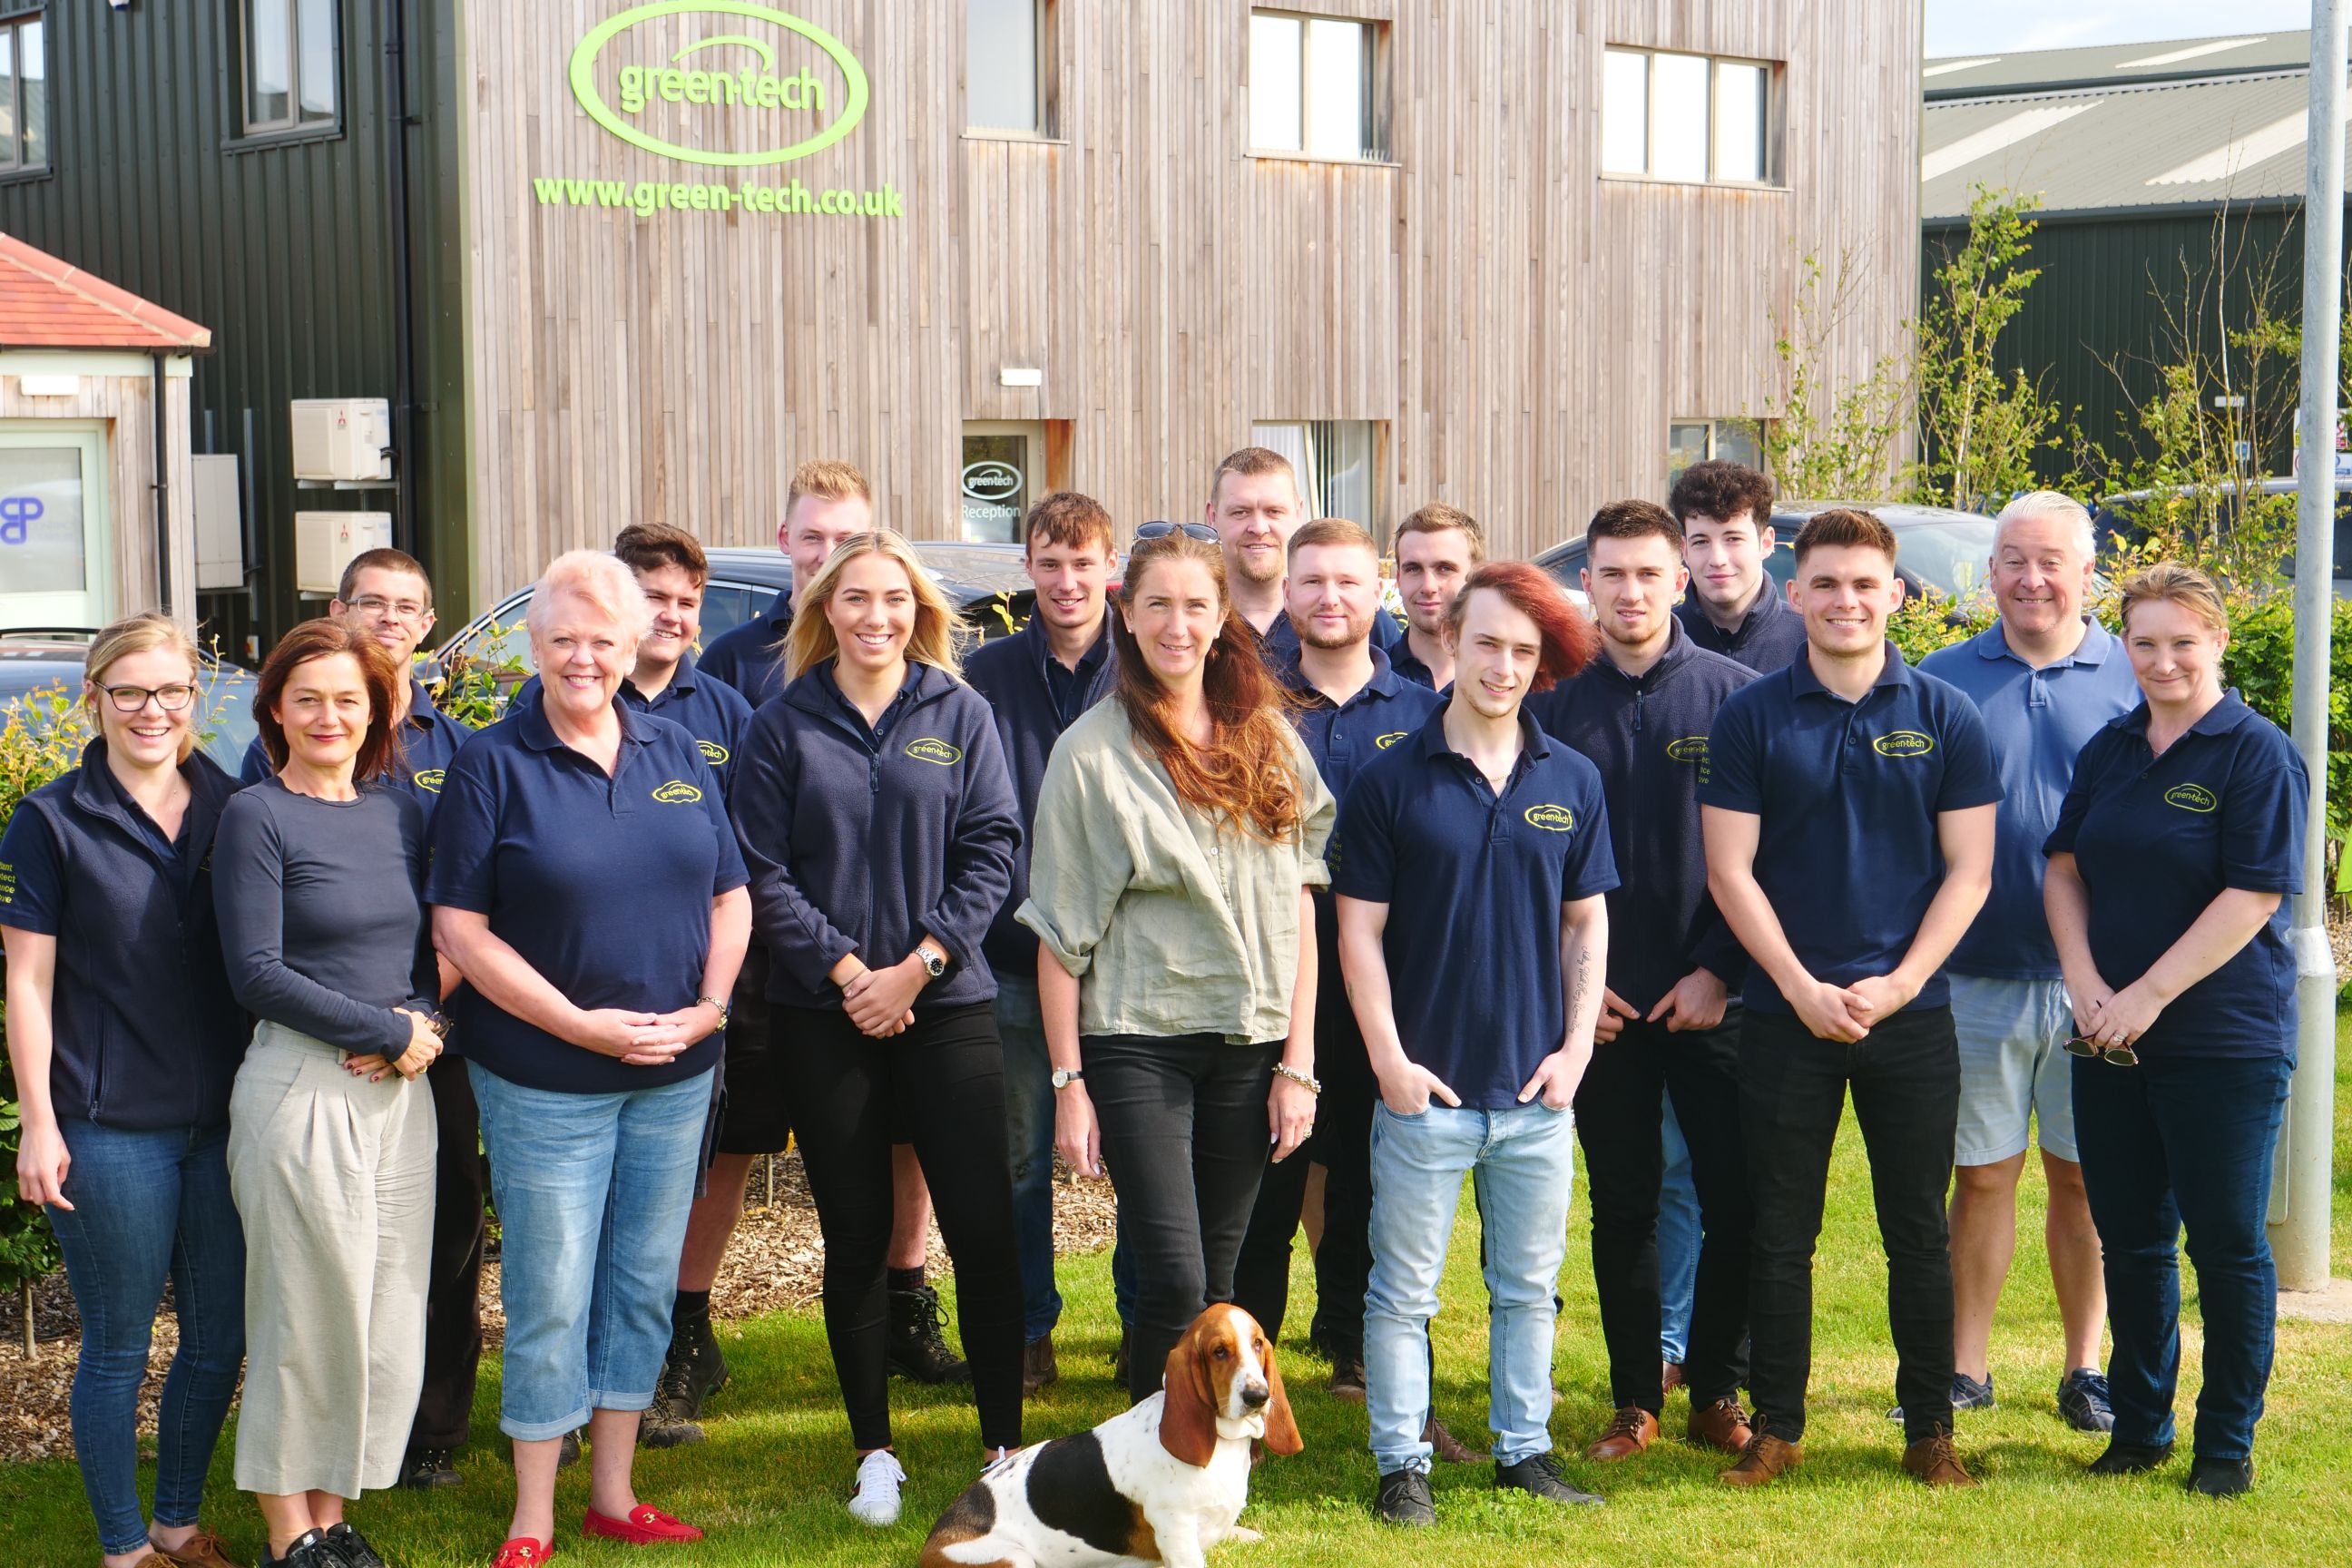 16 new starters join Green-tech in the first six months of 2019